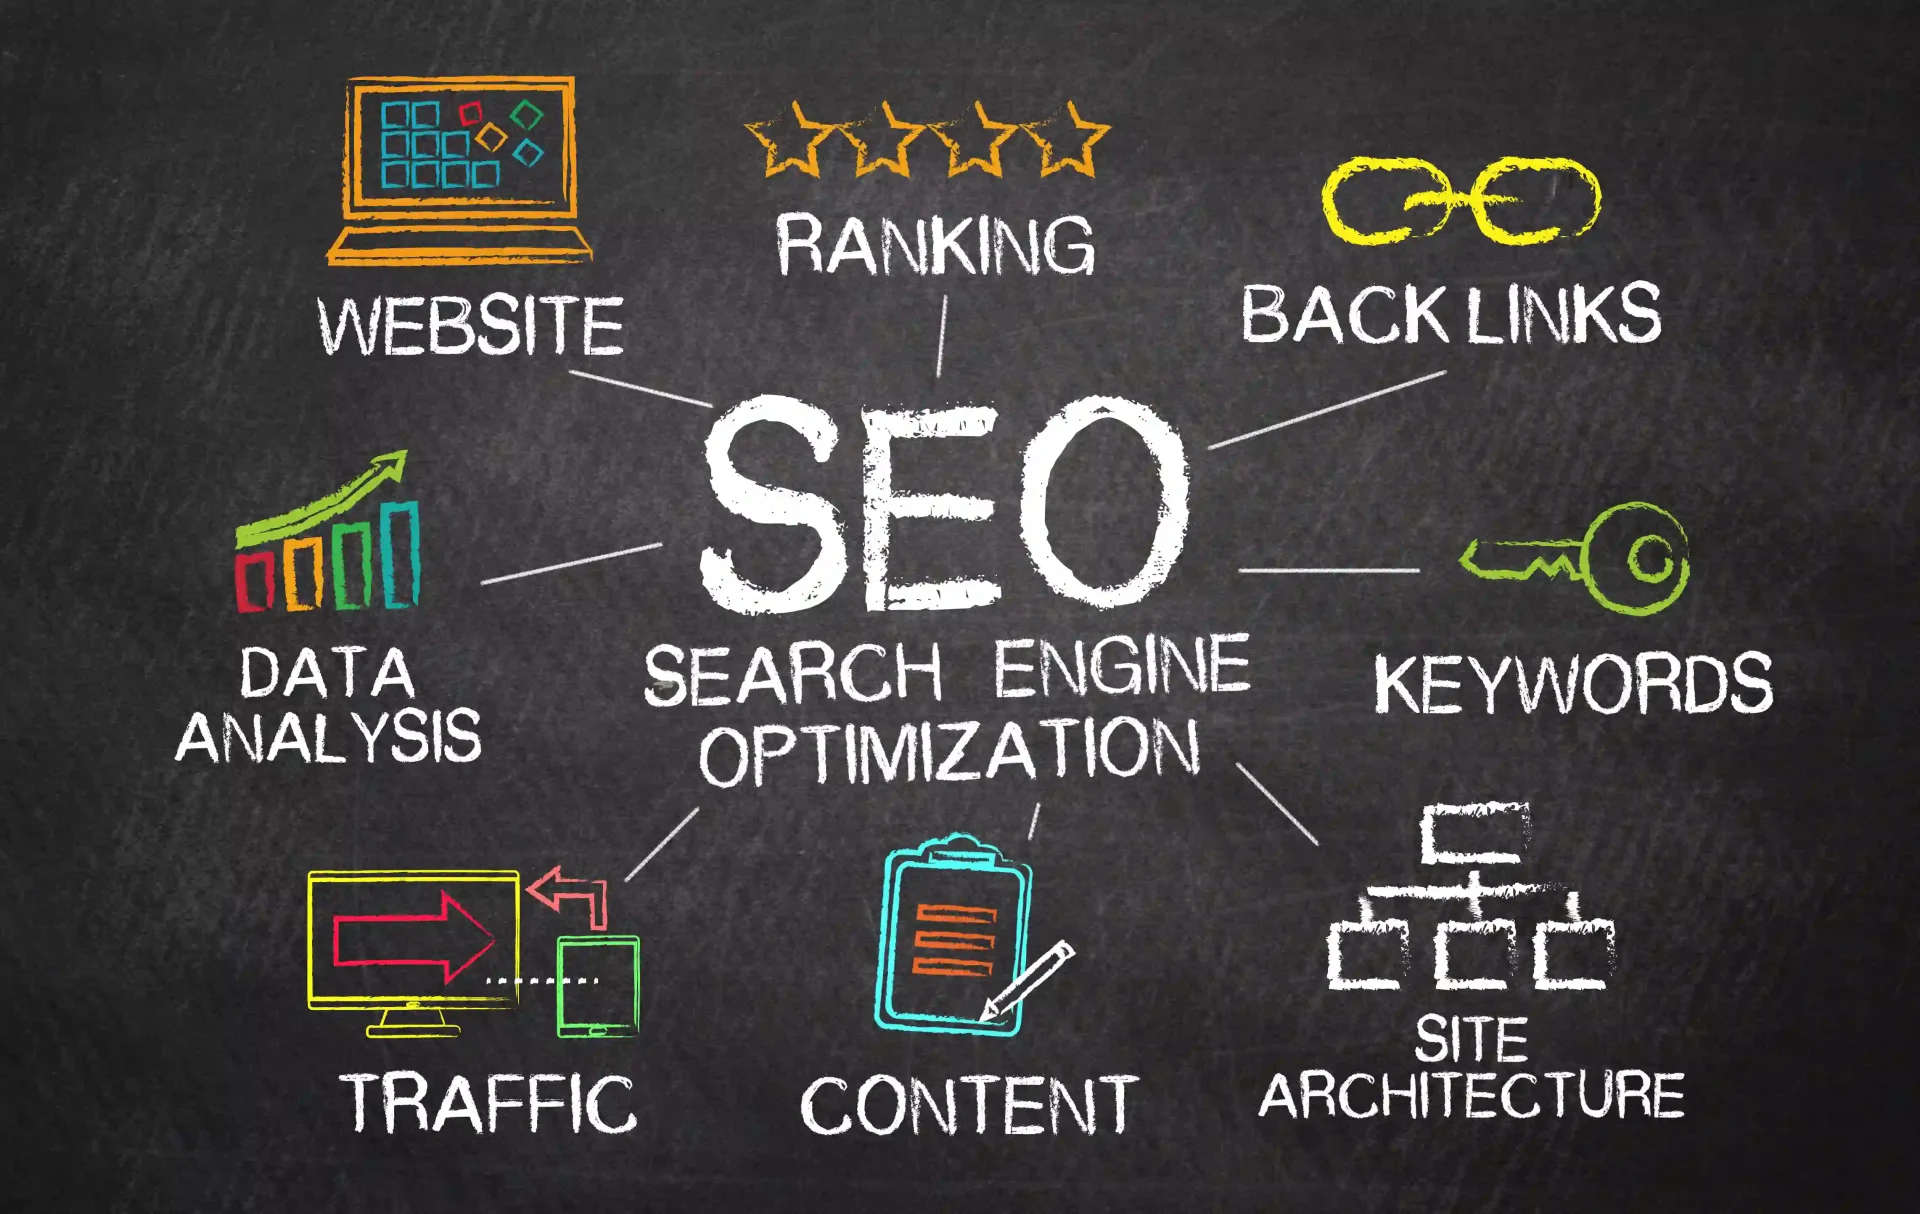 SEO consists of many areas. Symbols with text on a gray background. Website data analysis content backlinks keywords traffic ranking optimization site architecture.